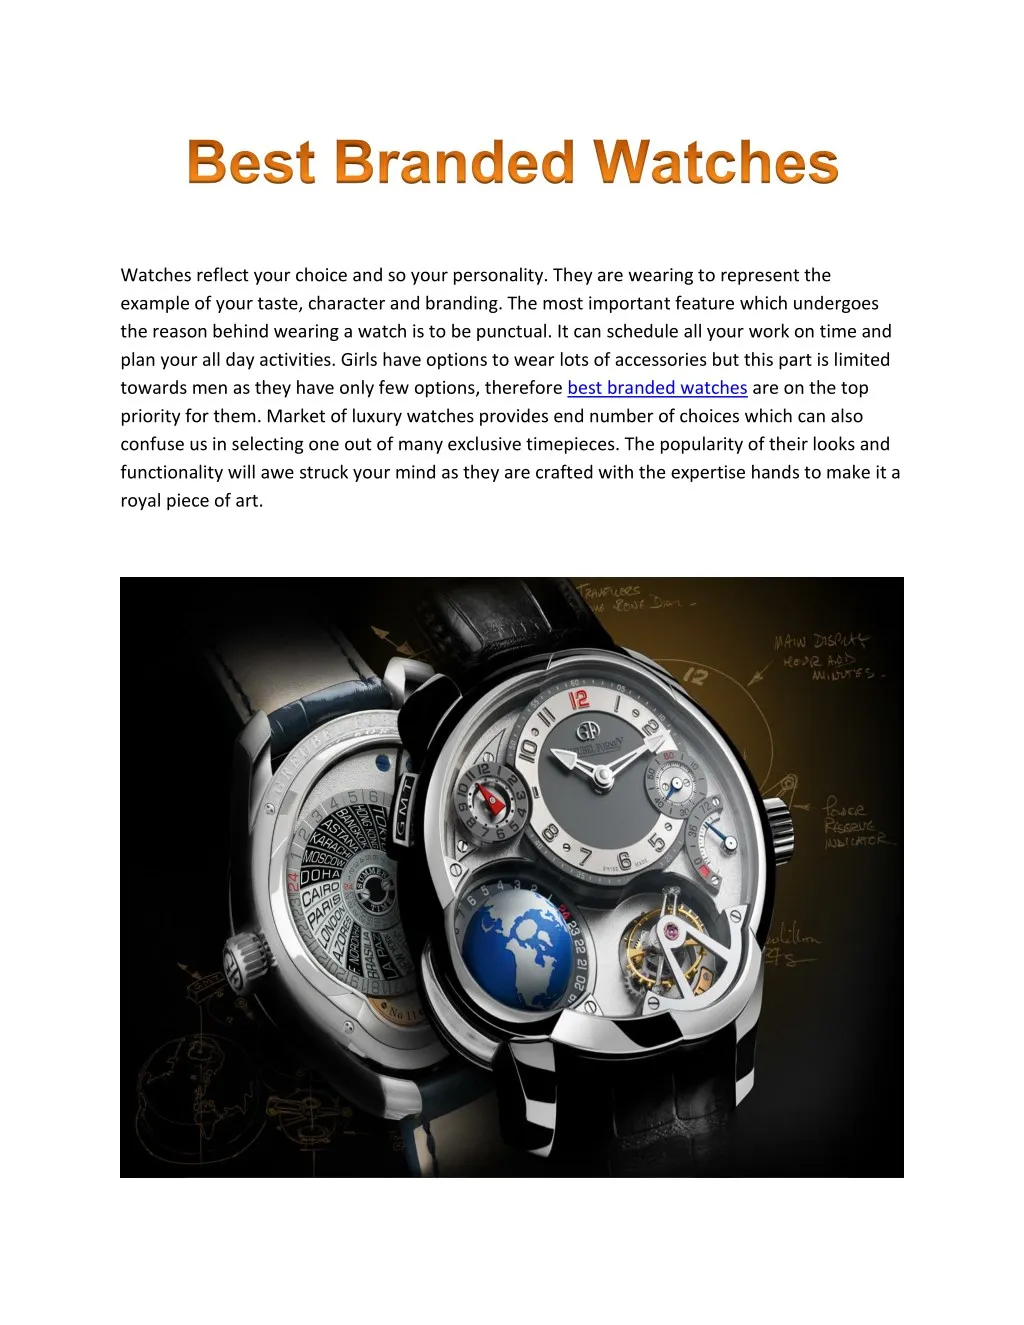 watches reflect your choice and so your